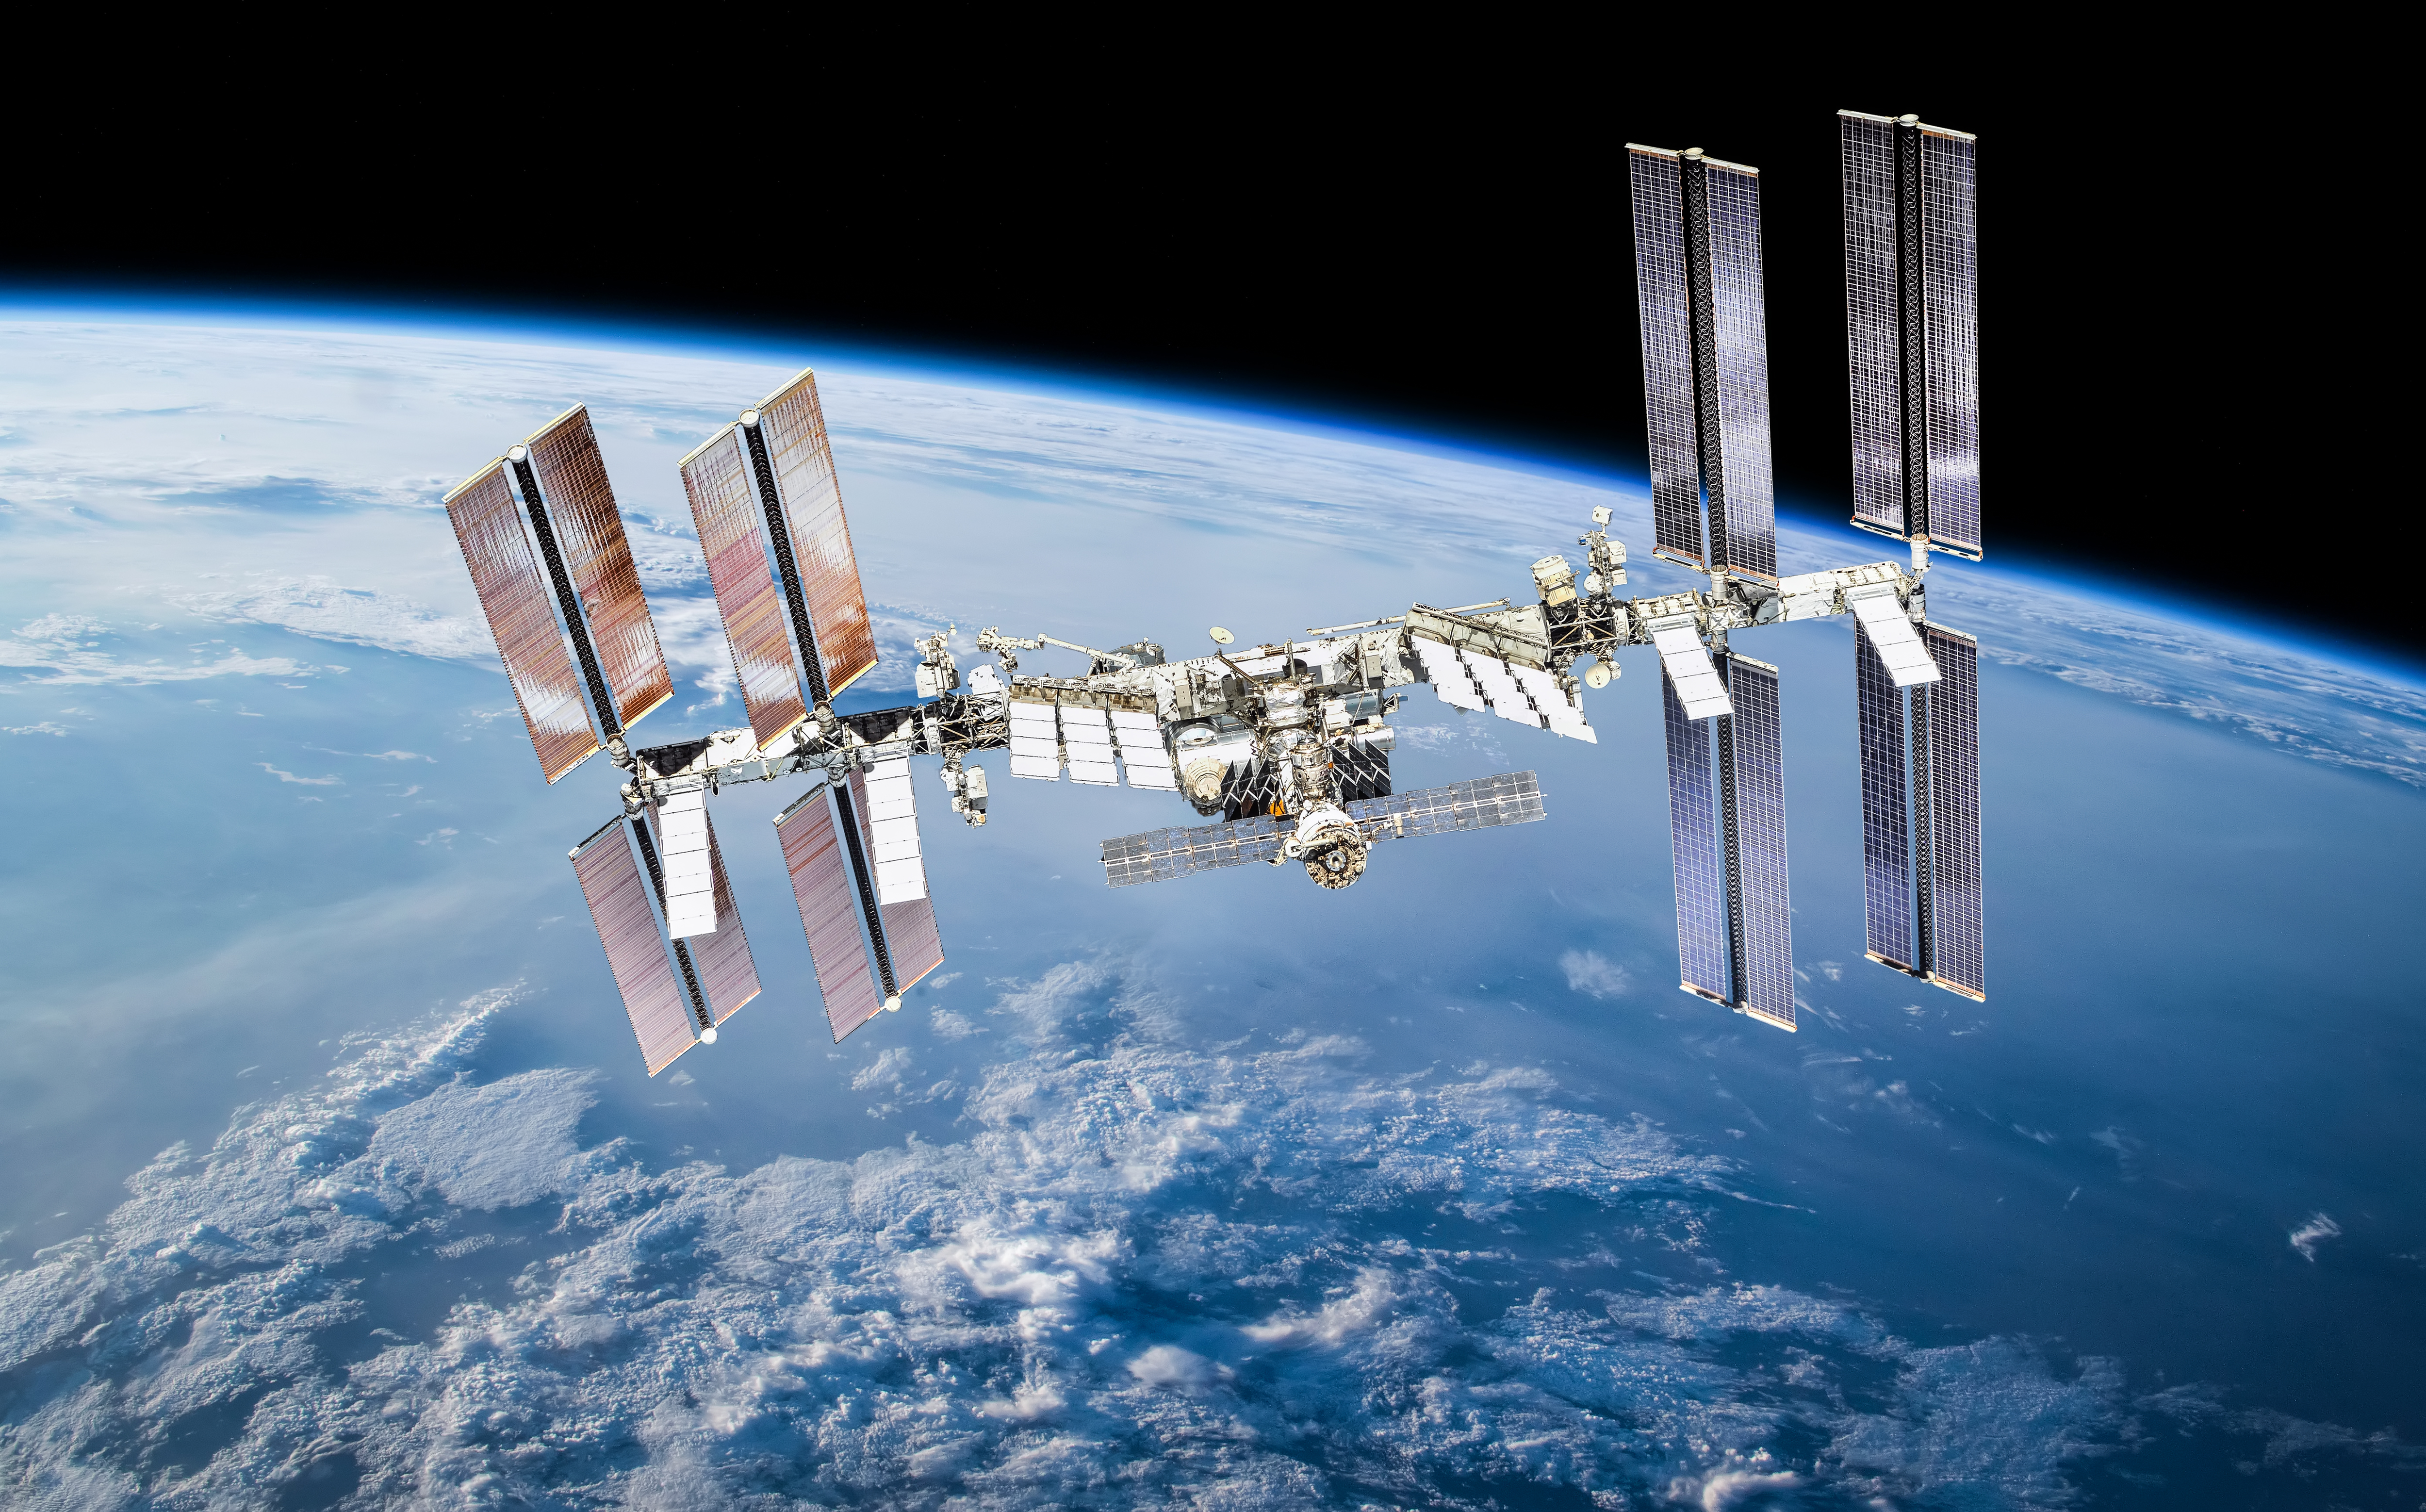 Billionaire space barons want to build ‘mixed-use business parks’ in low Earth orbit